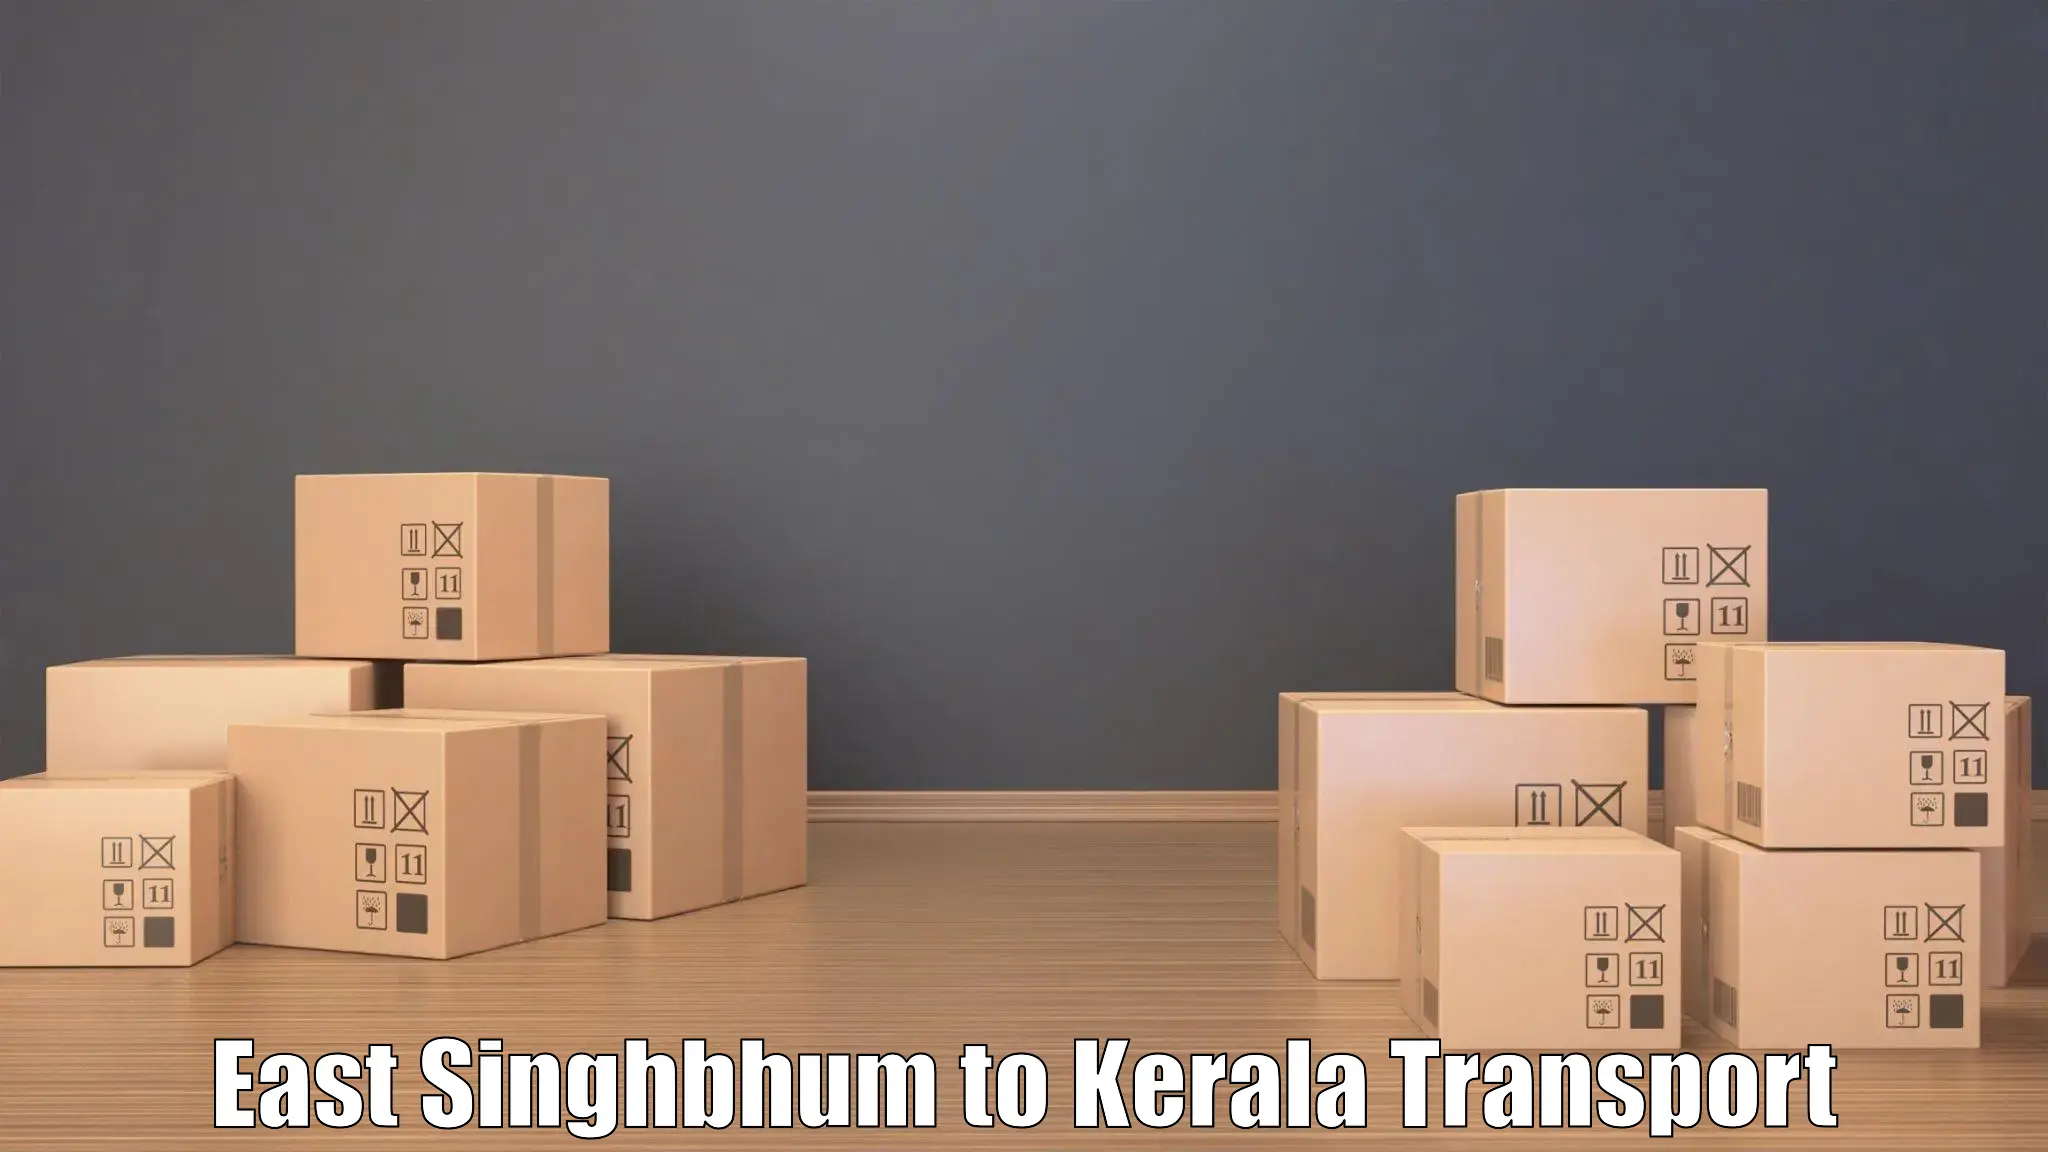 Container transportation services East Singhbhum to Kattappana